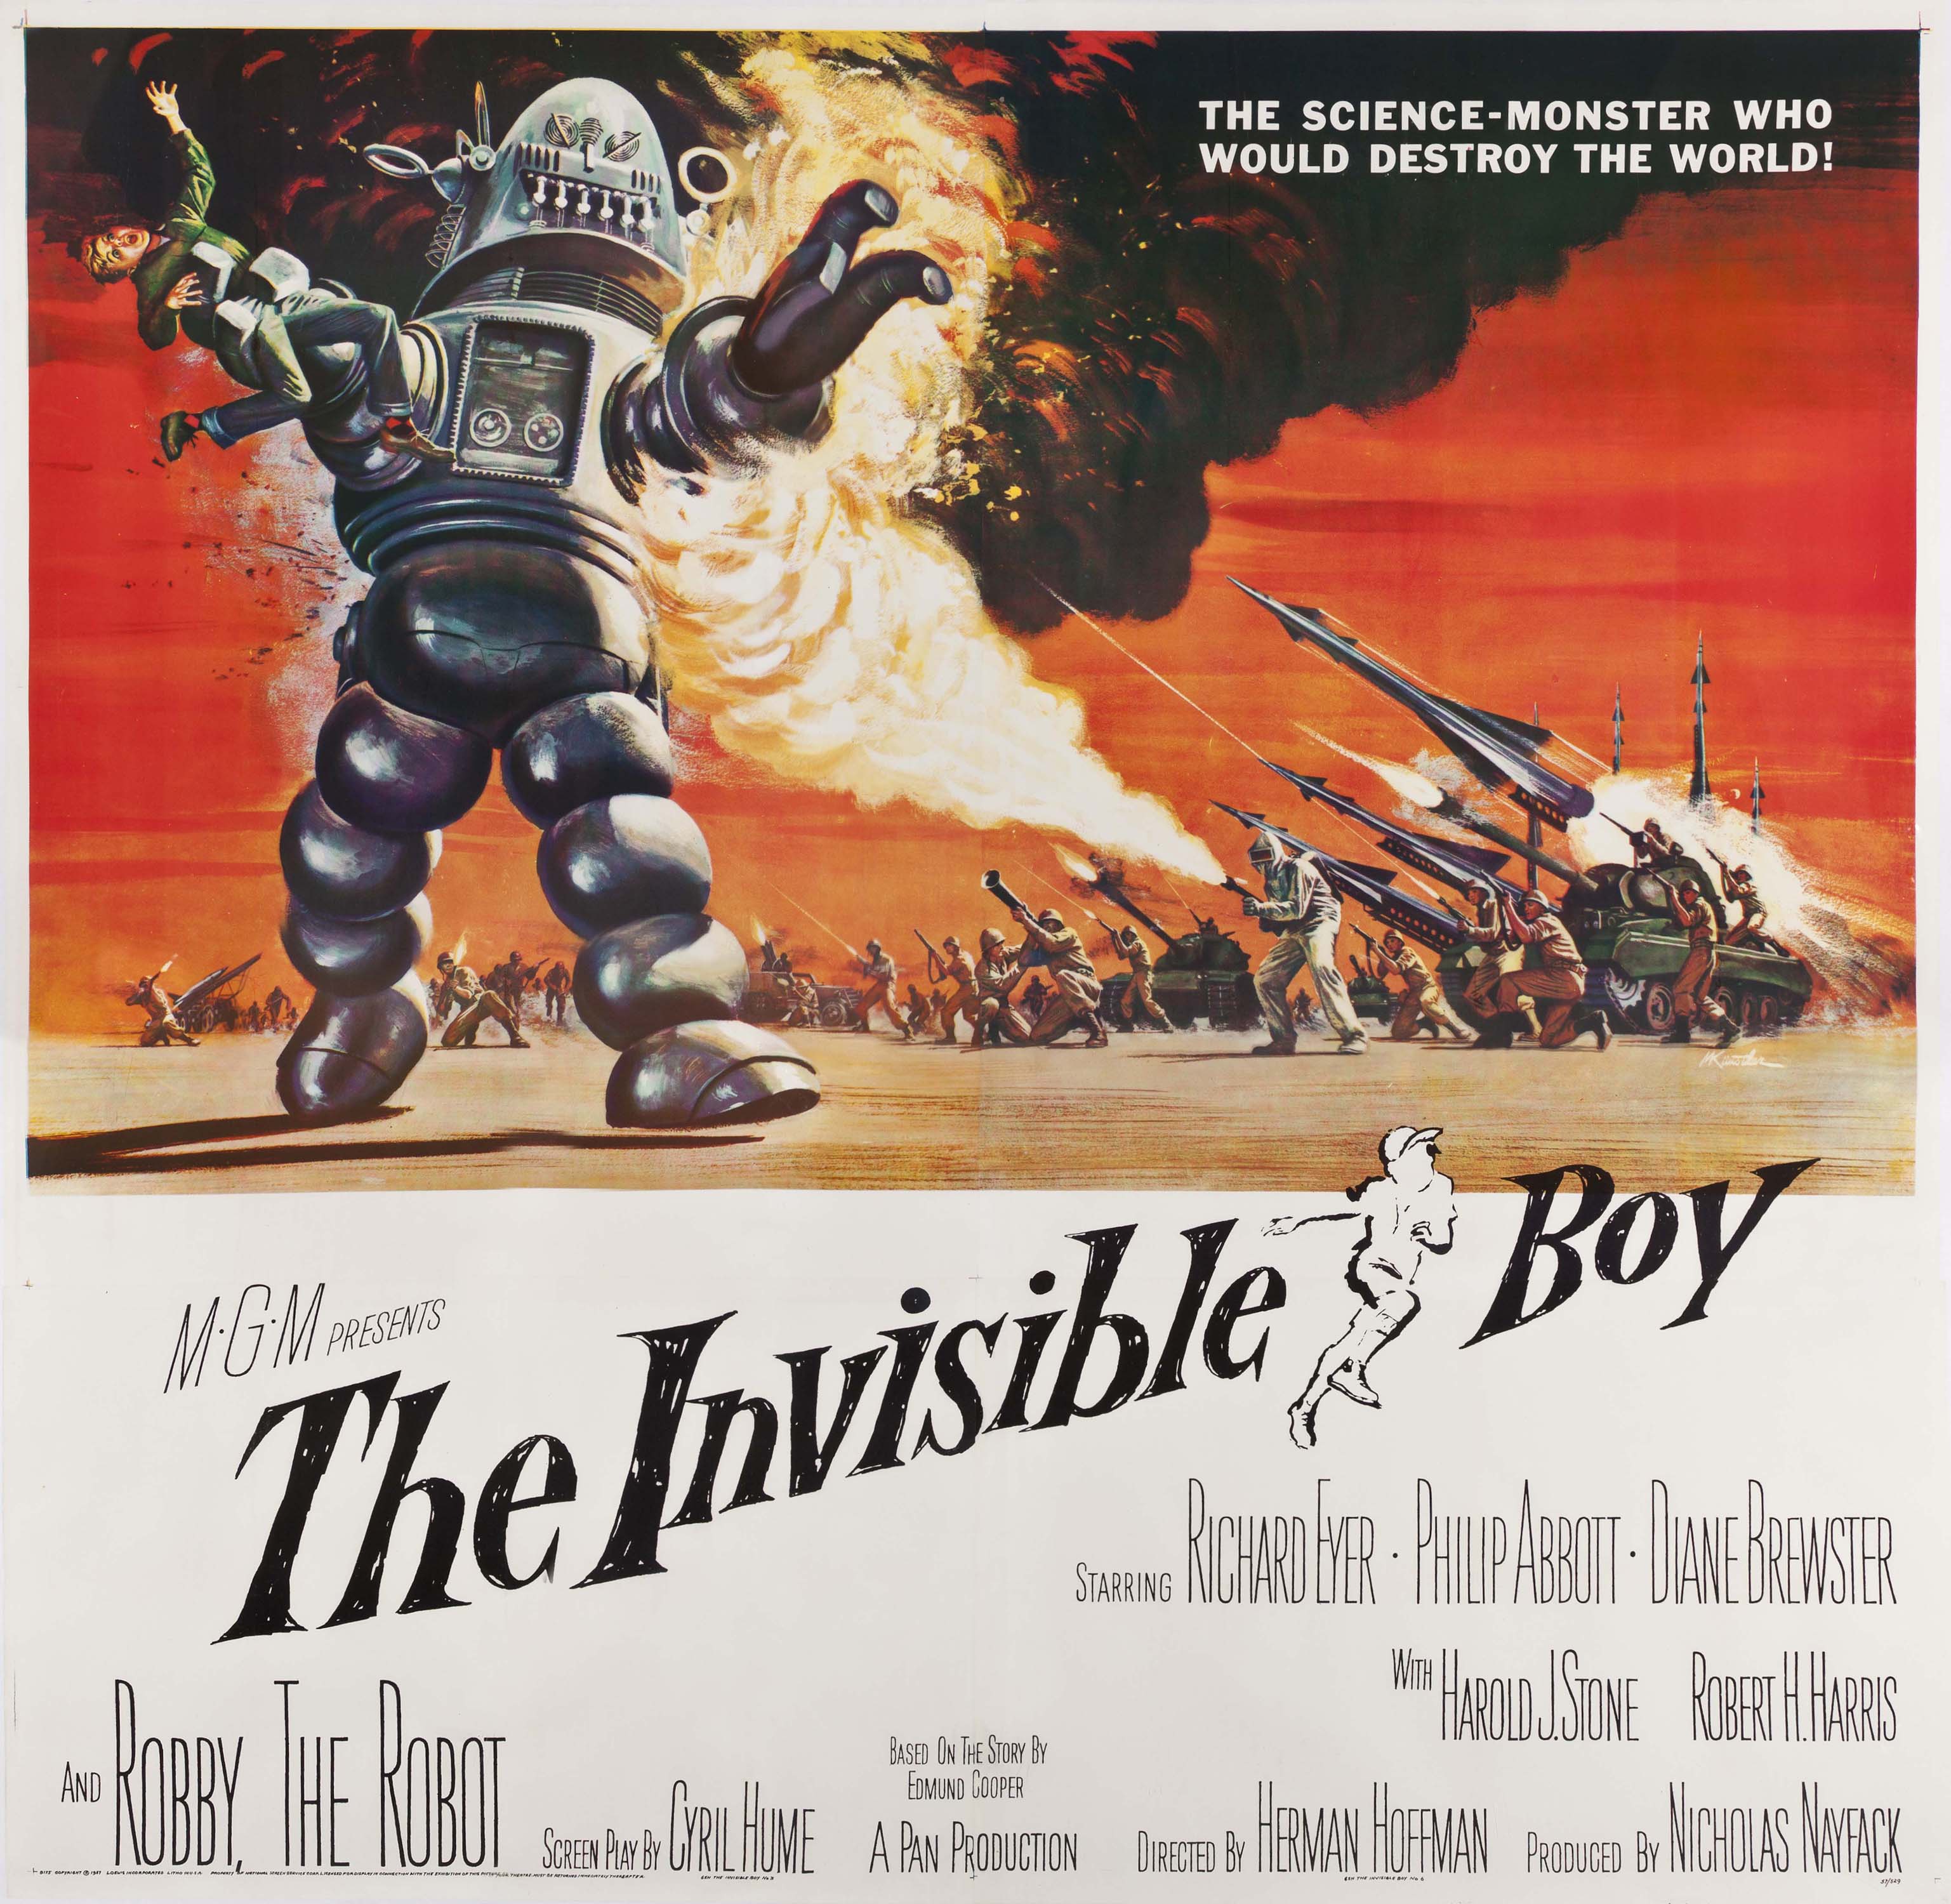 14" x 36" Insert Poster Reproduction The Invisible Boy 1957 